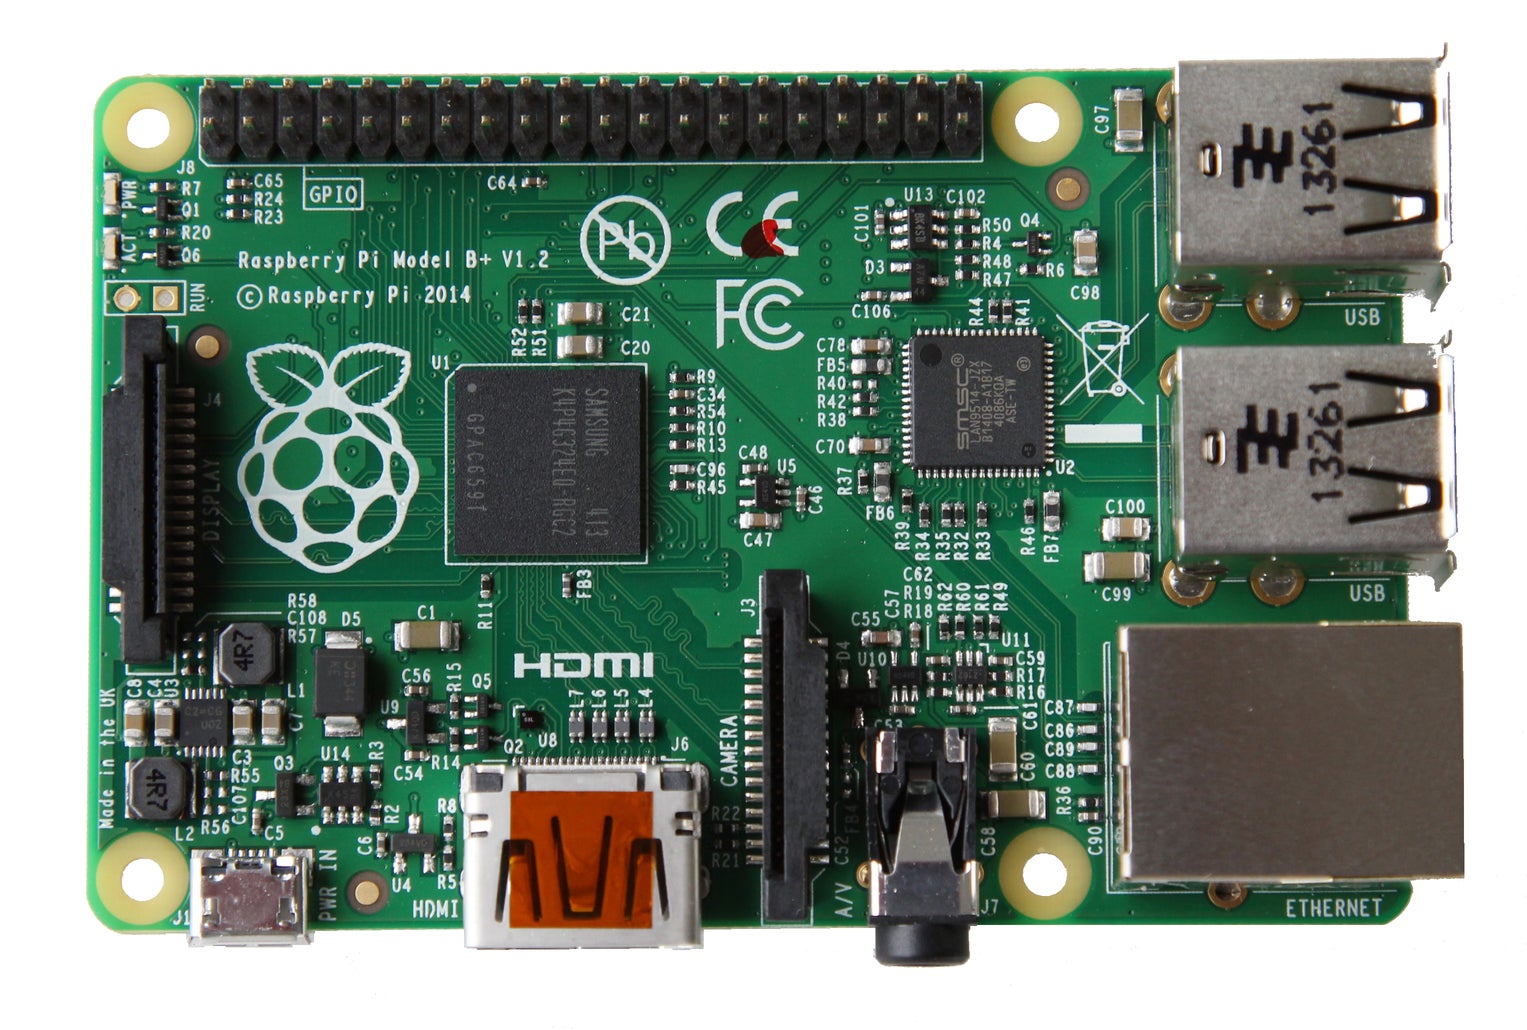 The Raspberry Pi B+ Adds More Ports and Features, Consumes Less Power